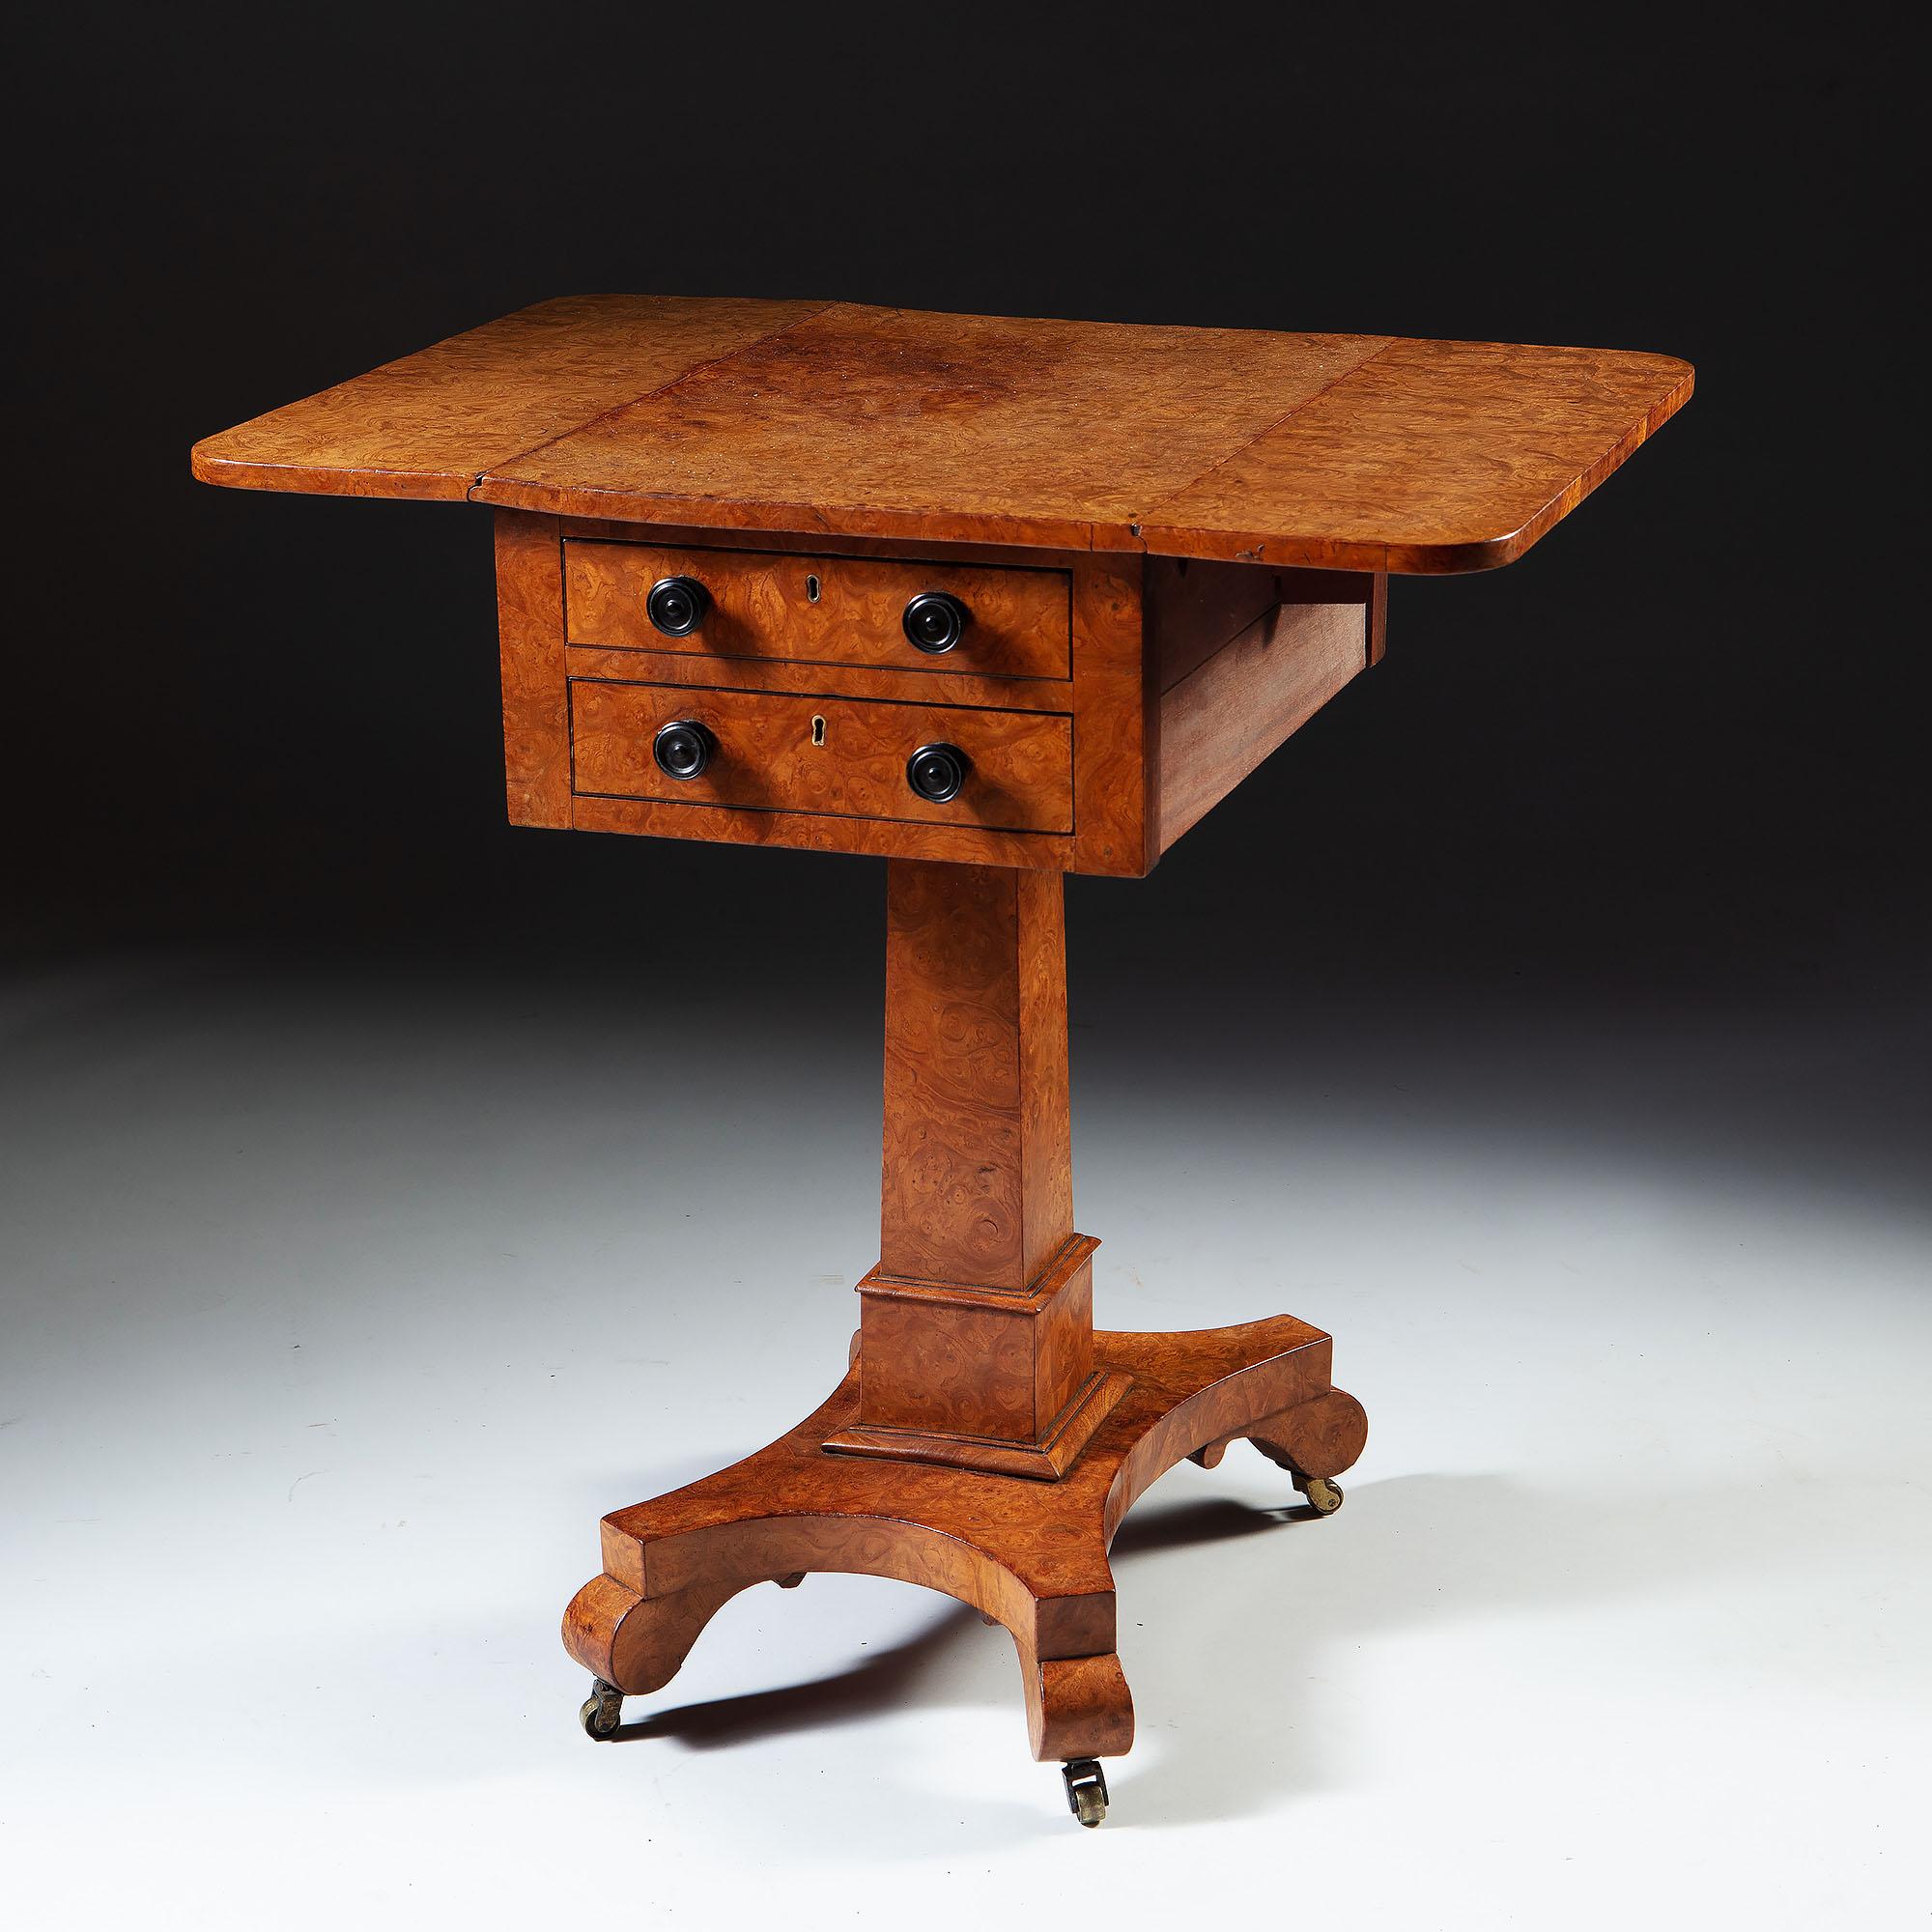 19th Century Burr Ashwood Work Table with Drop Leaf Sides and Drawers 1